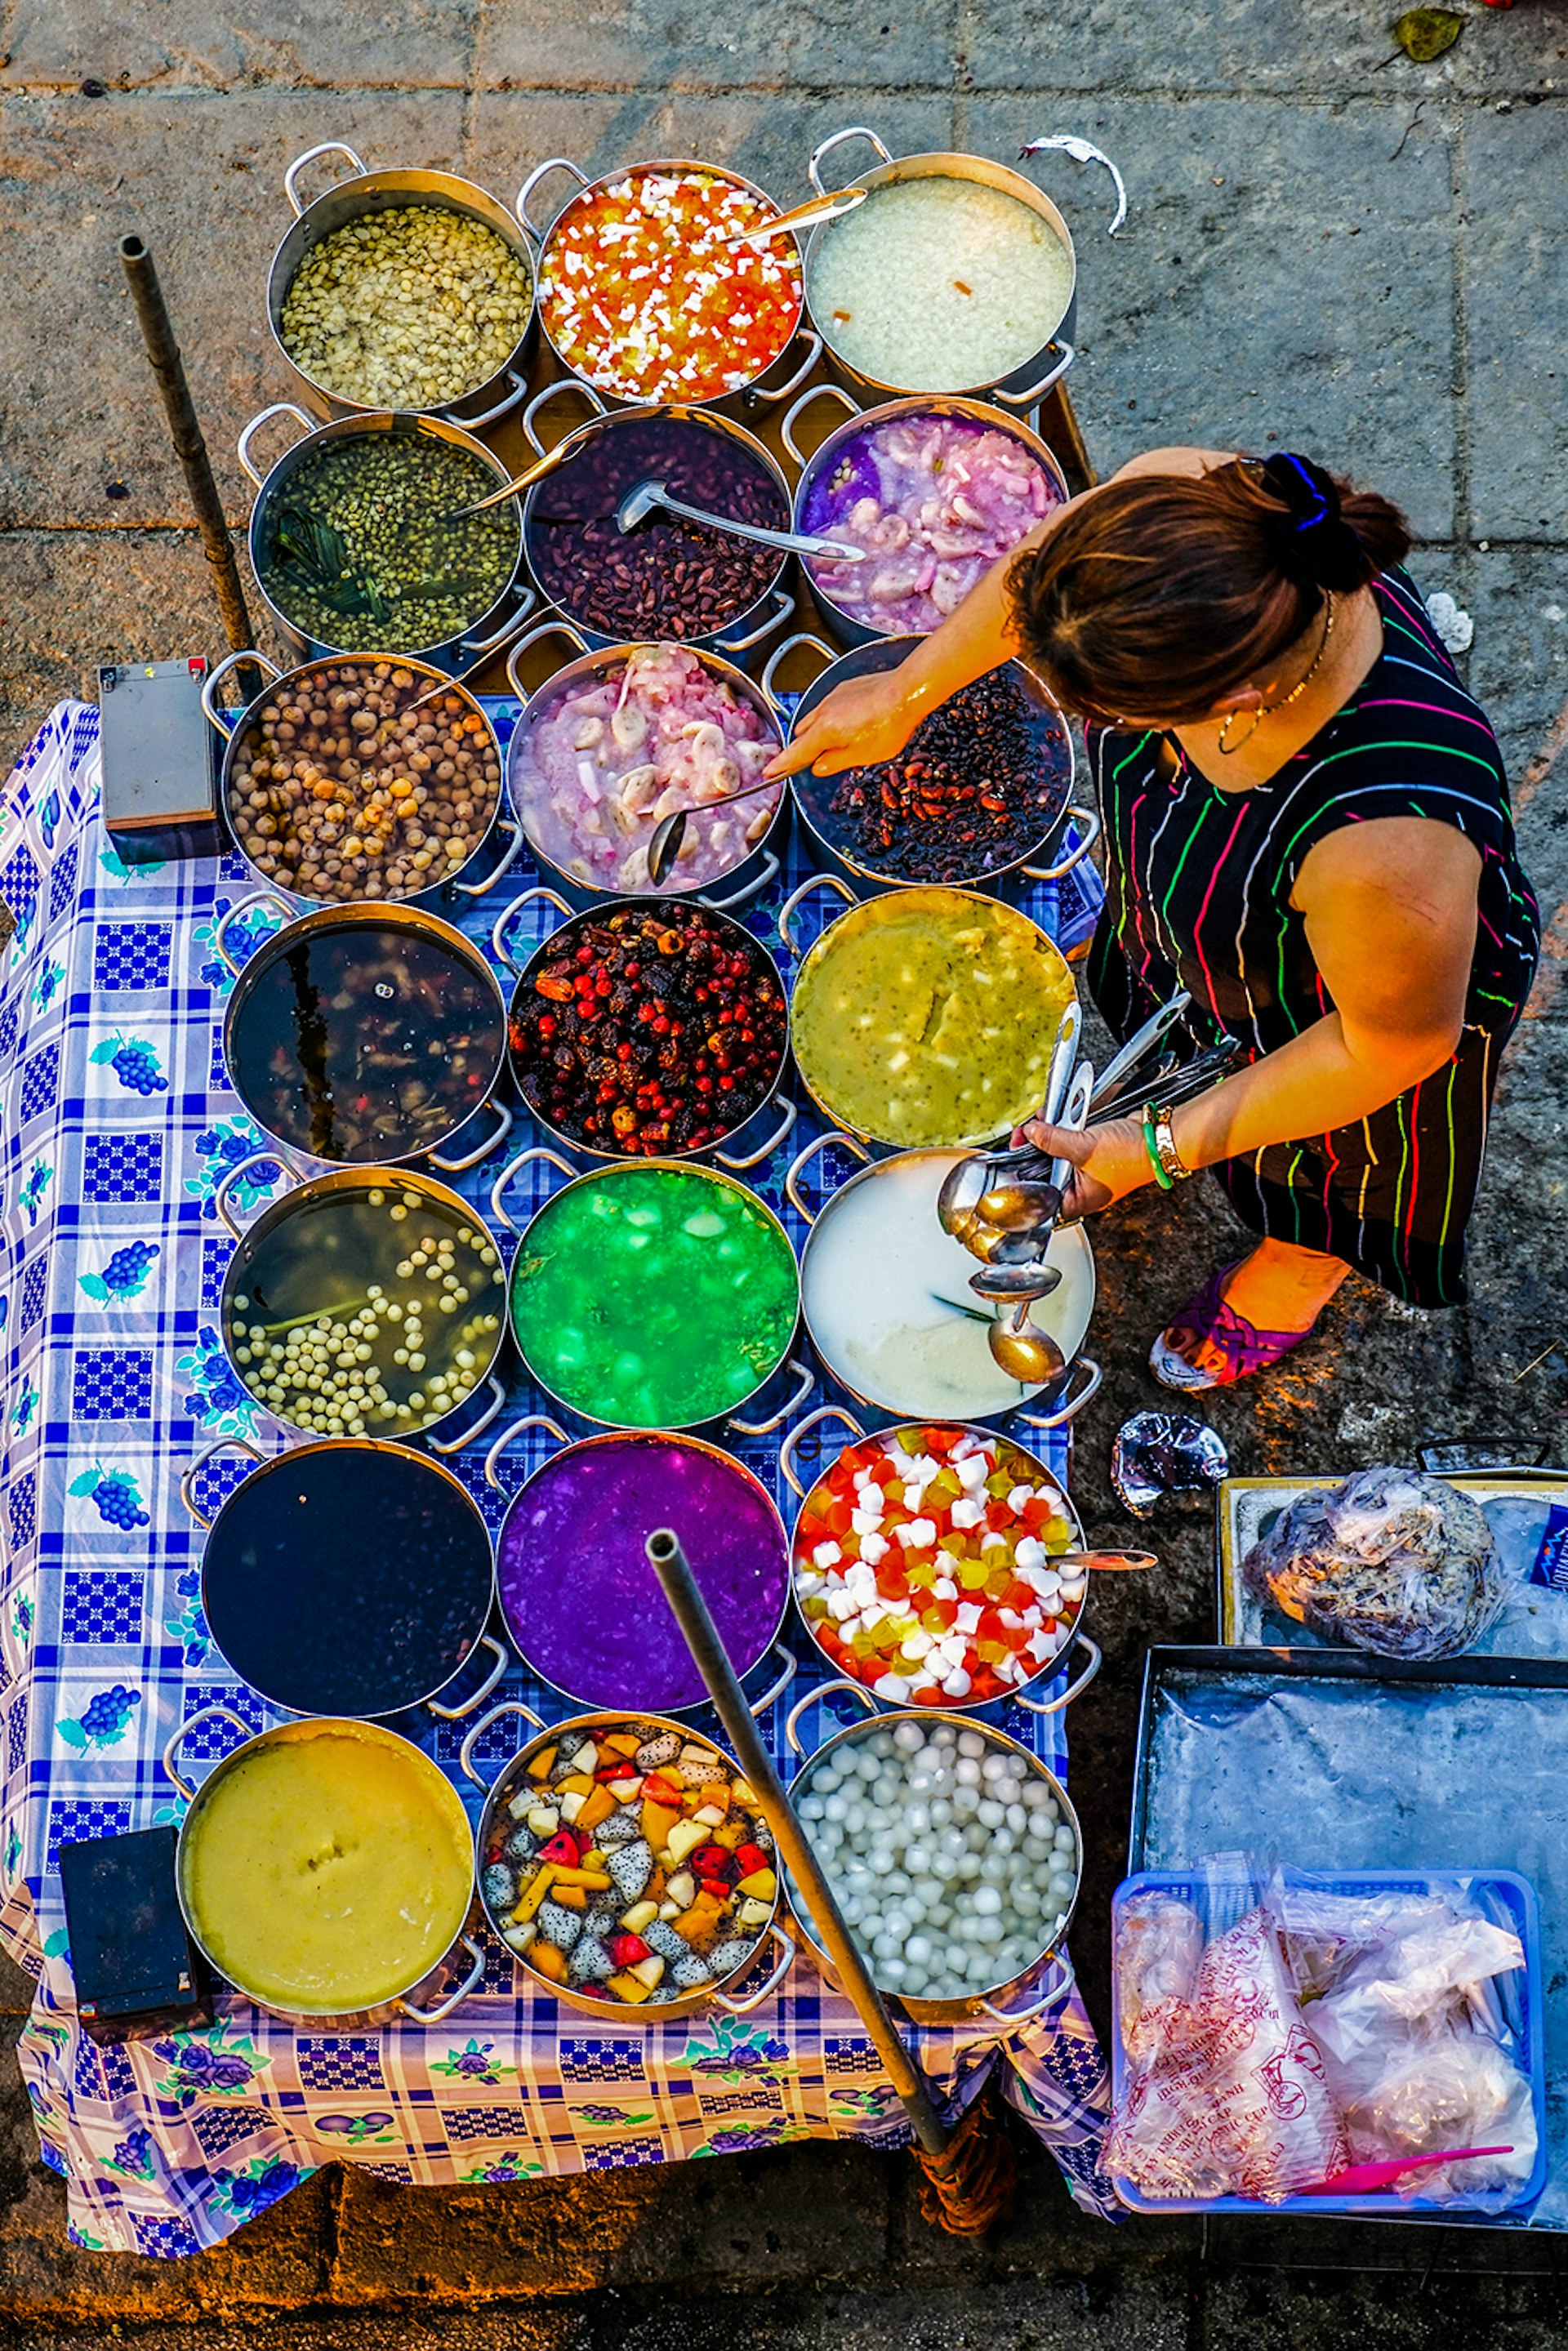 A woman tends to several pots filled with different-colored sweets © James Pham / Lonely Planet